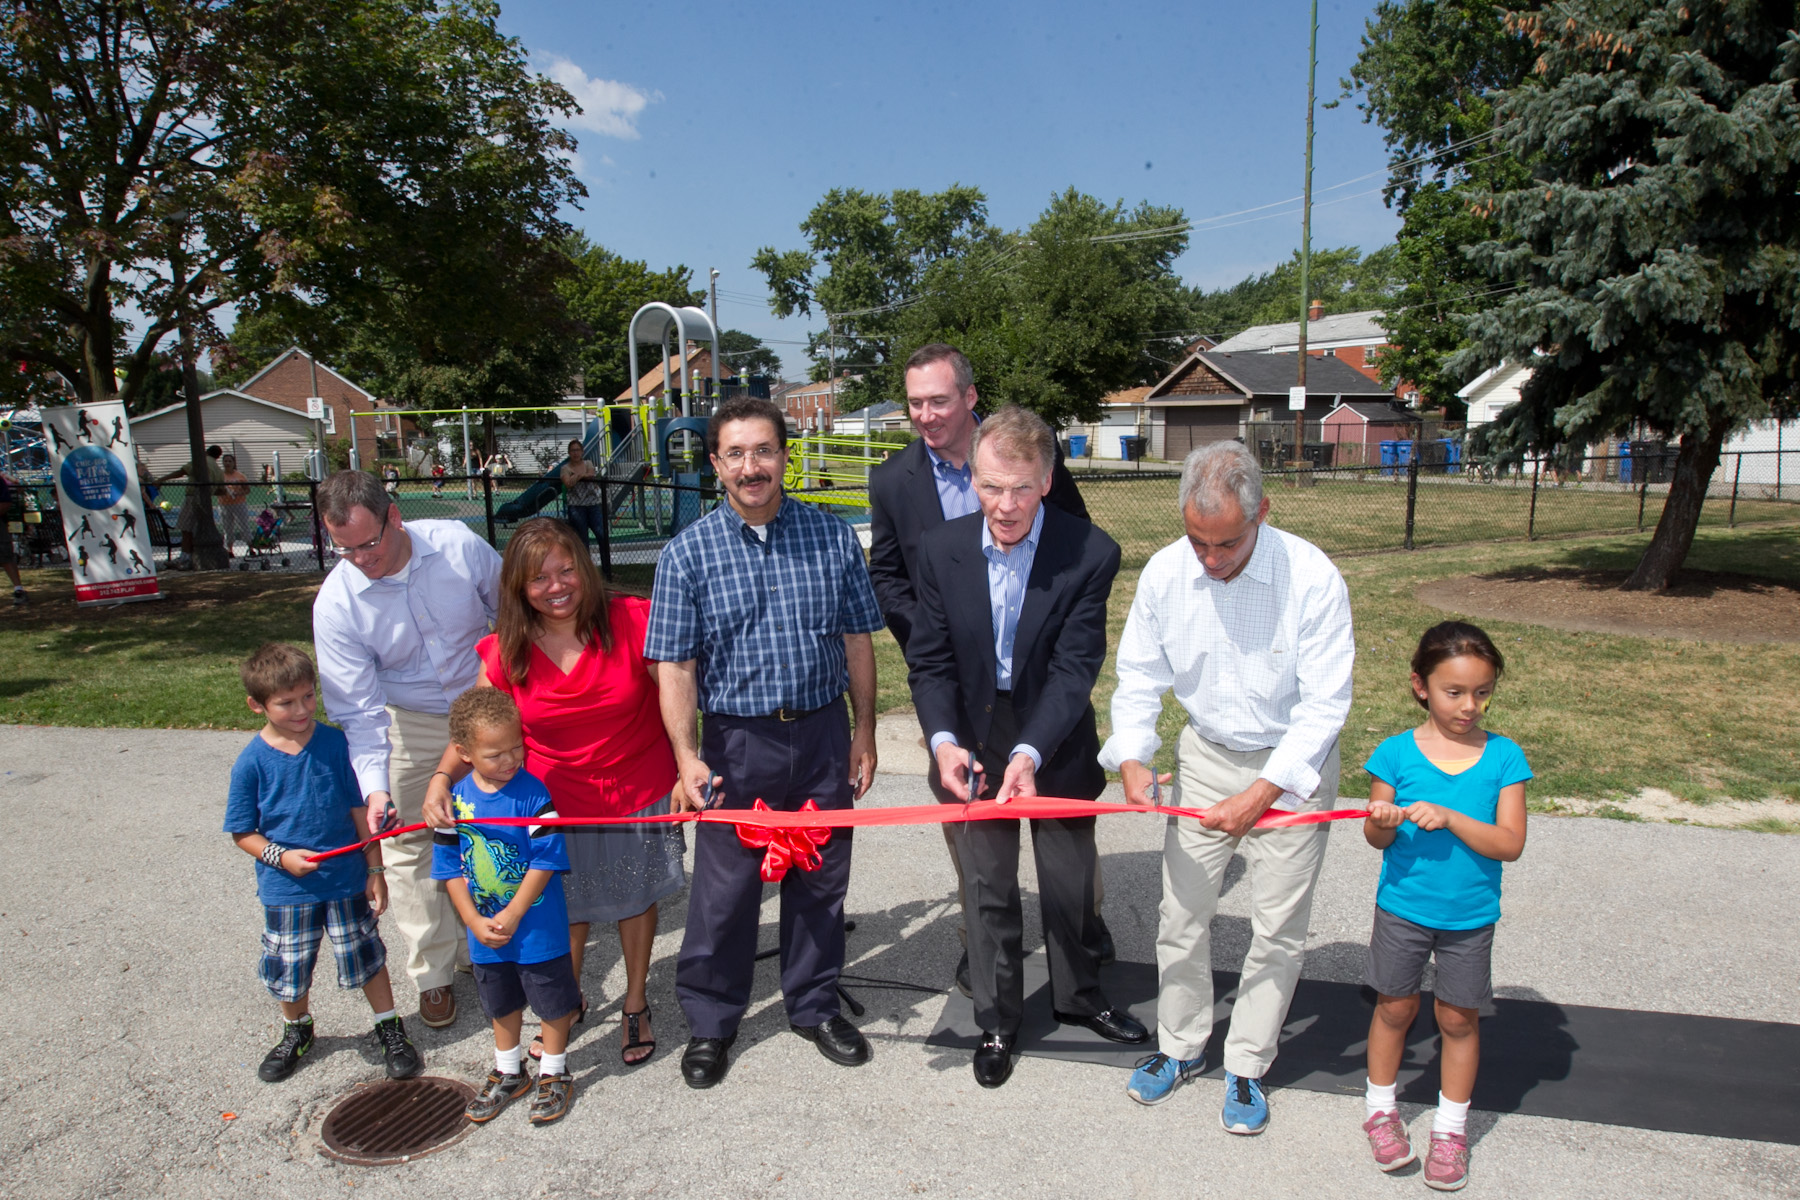 Mayor Emanuel joins Speaker Madigan and community members to celebrate the opening of a newly restored playground at Lawler Park. 